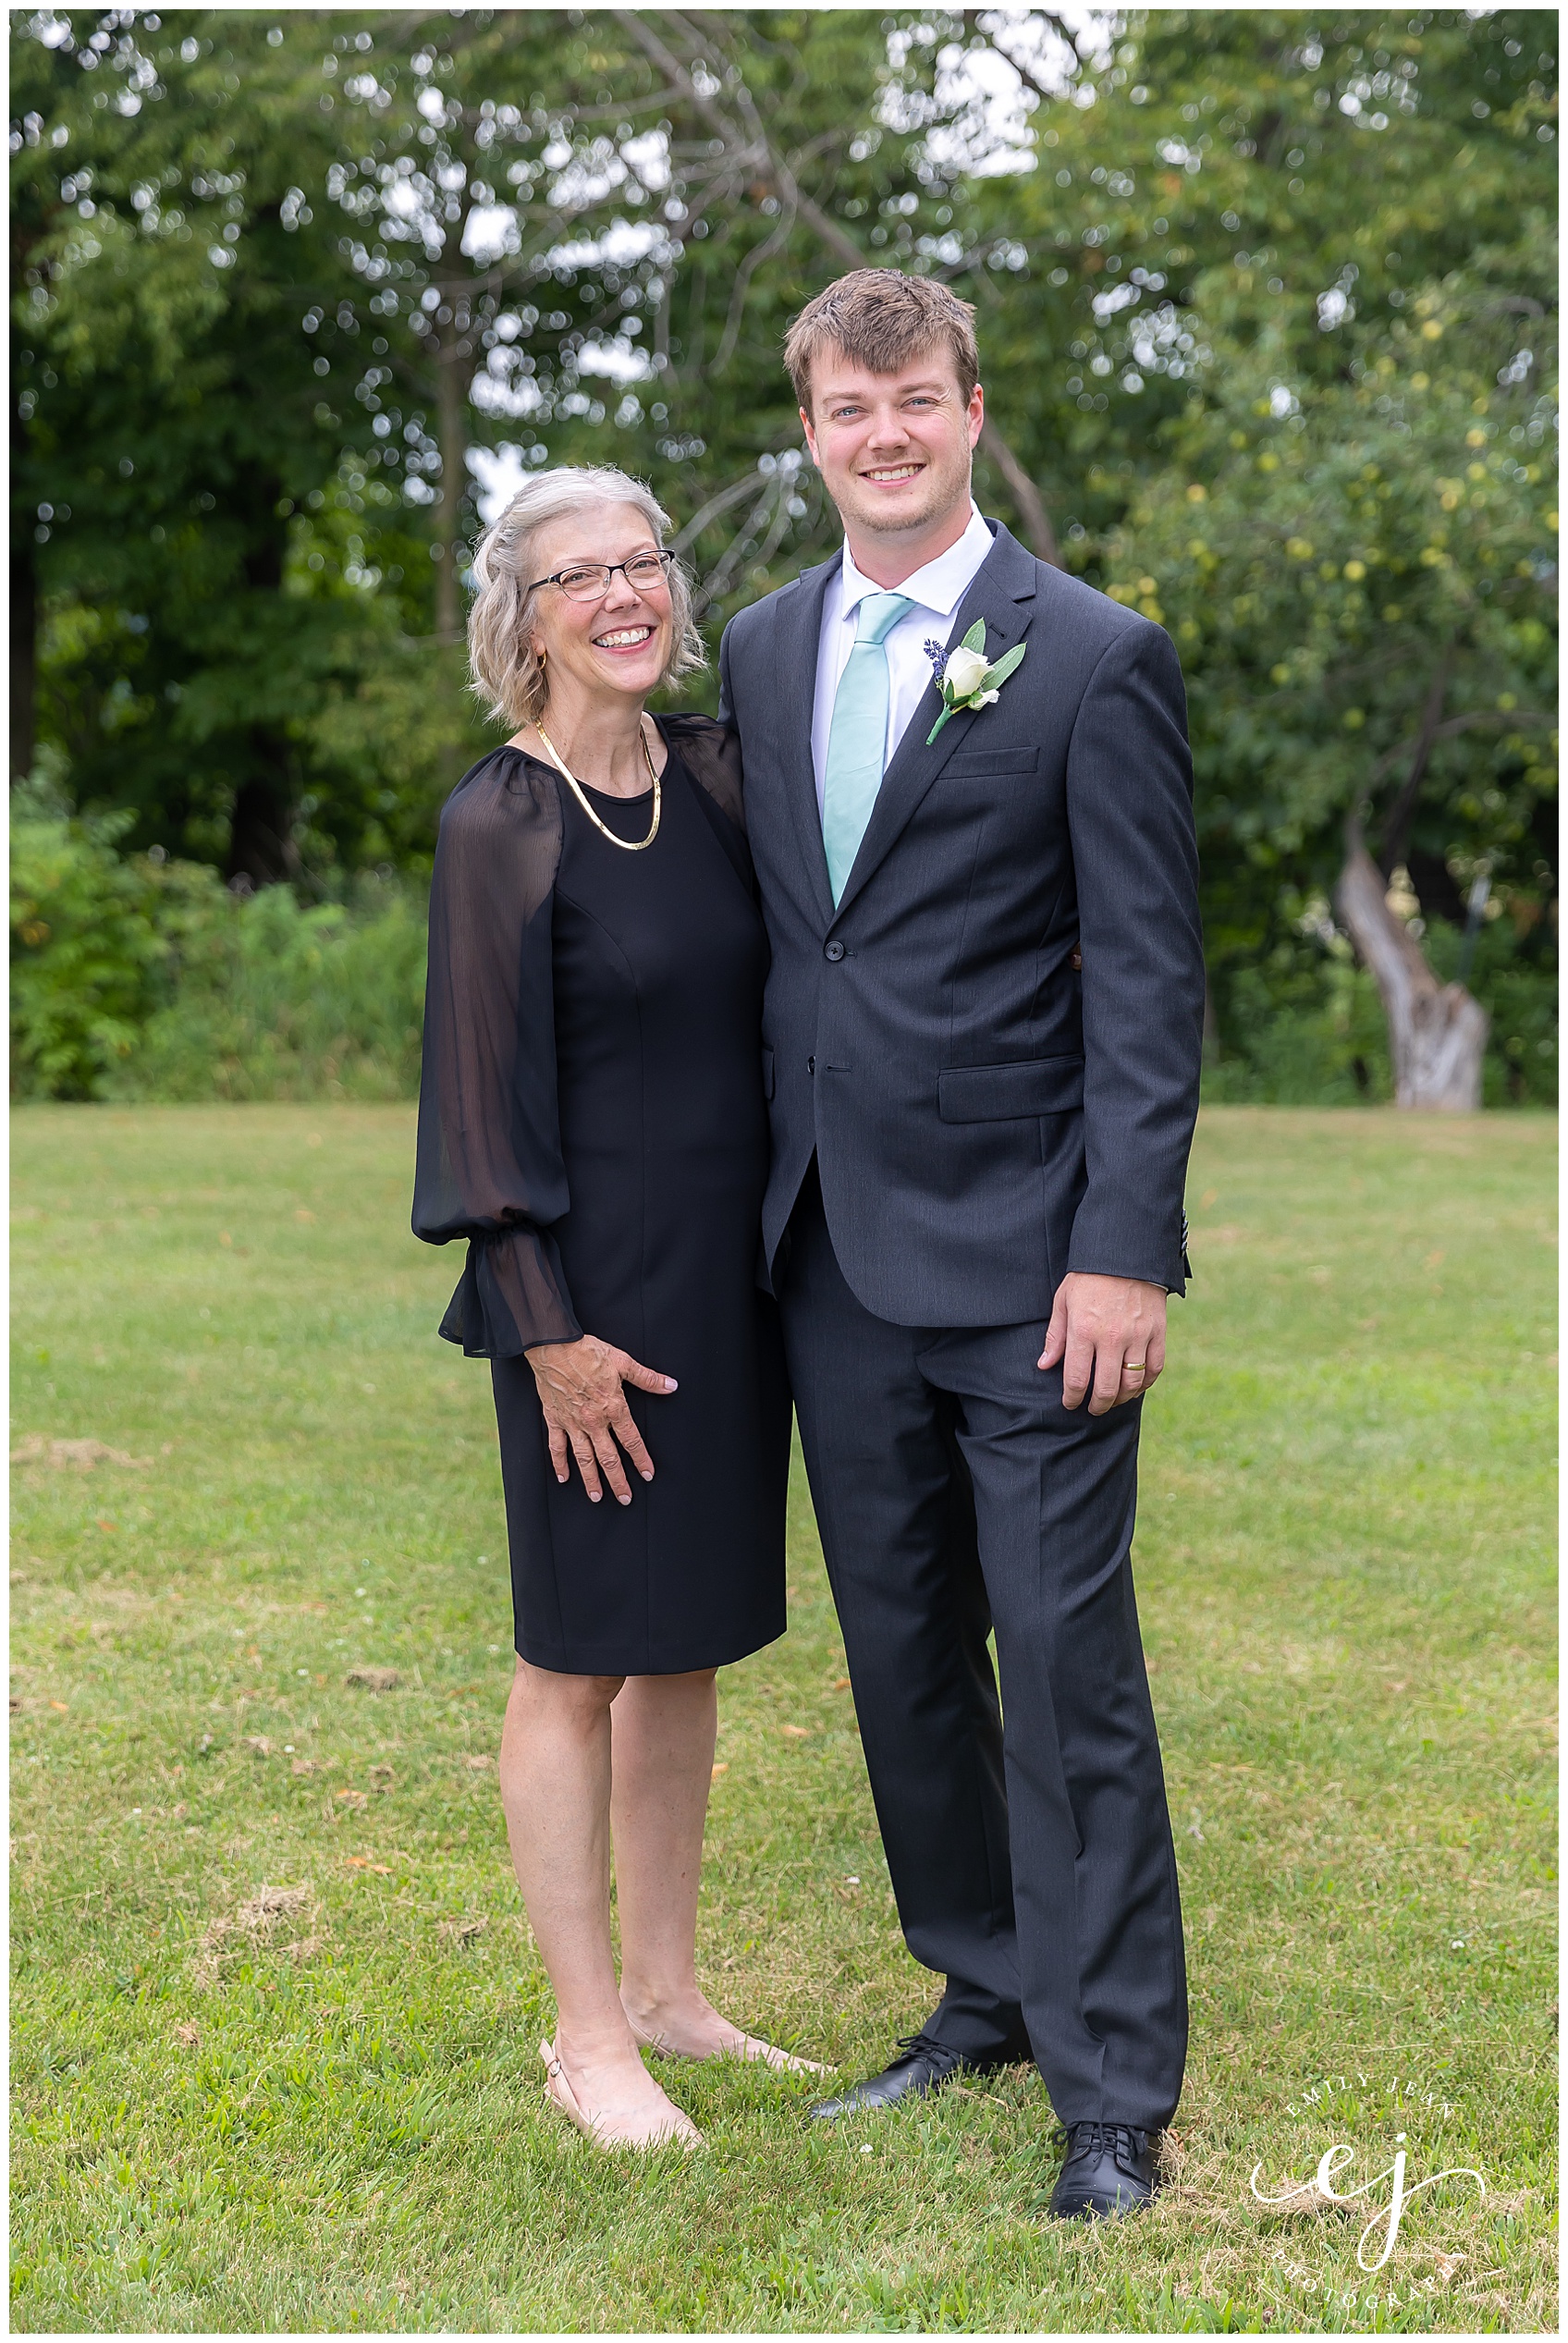 groom and his mom smiling at camera in grass field